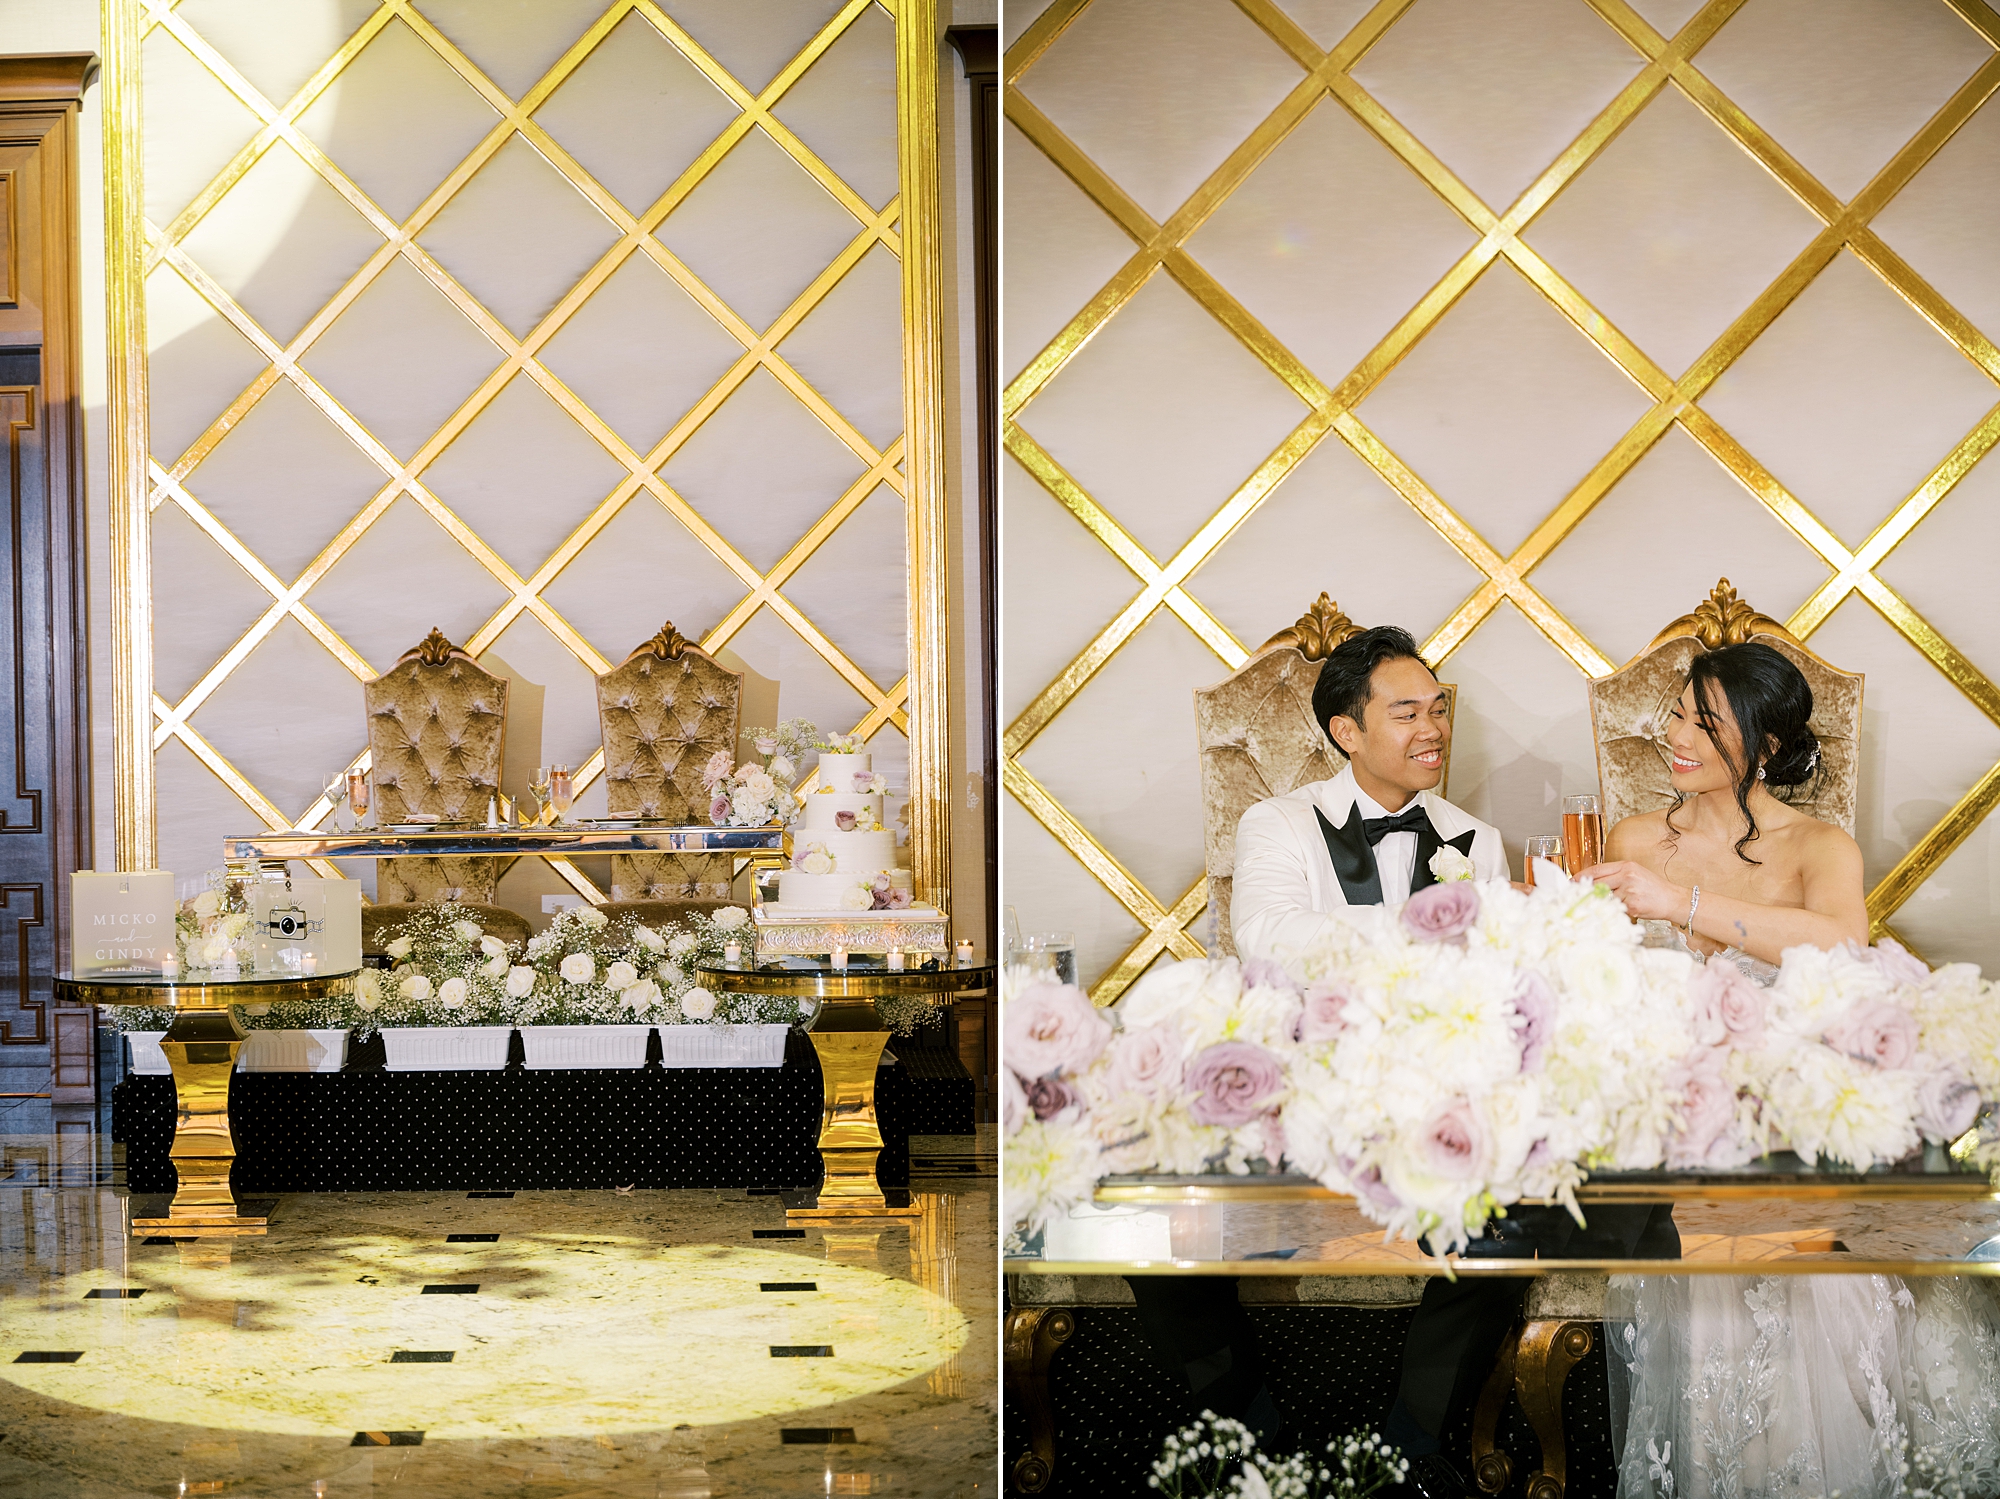 newlyweds sit at sweetheart table against white and gold crisscrossed wall